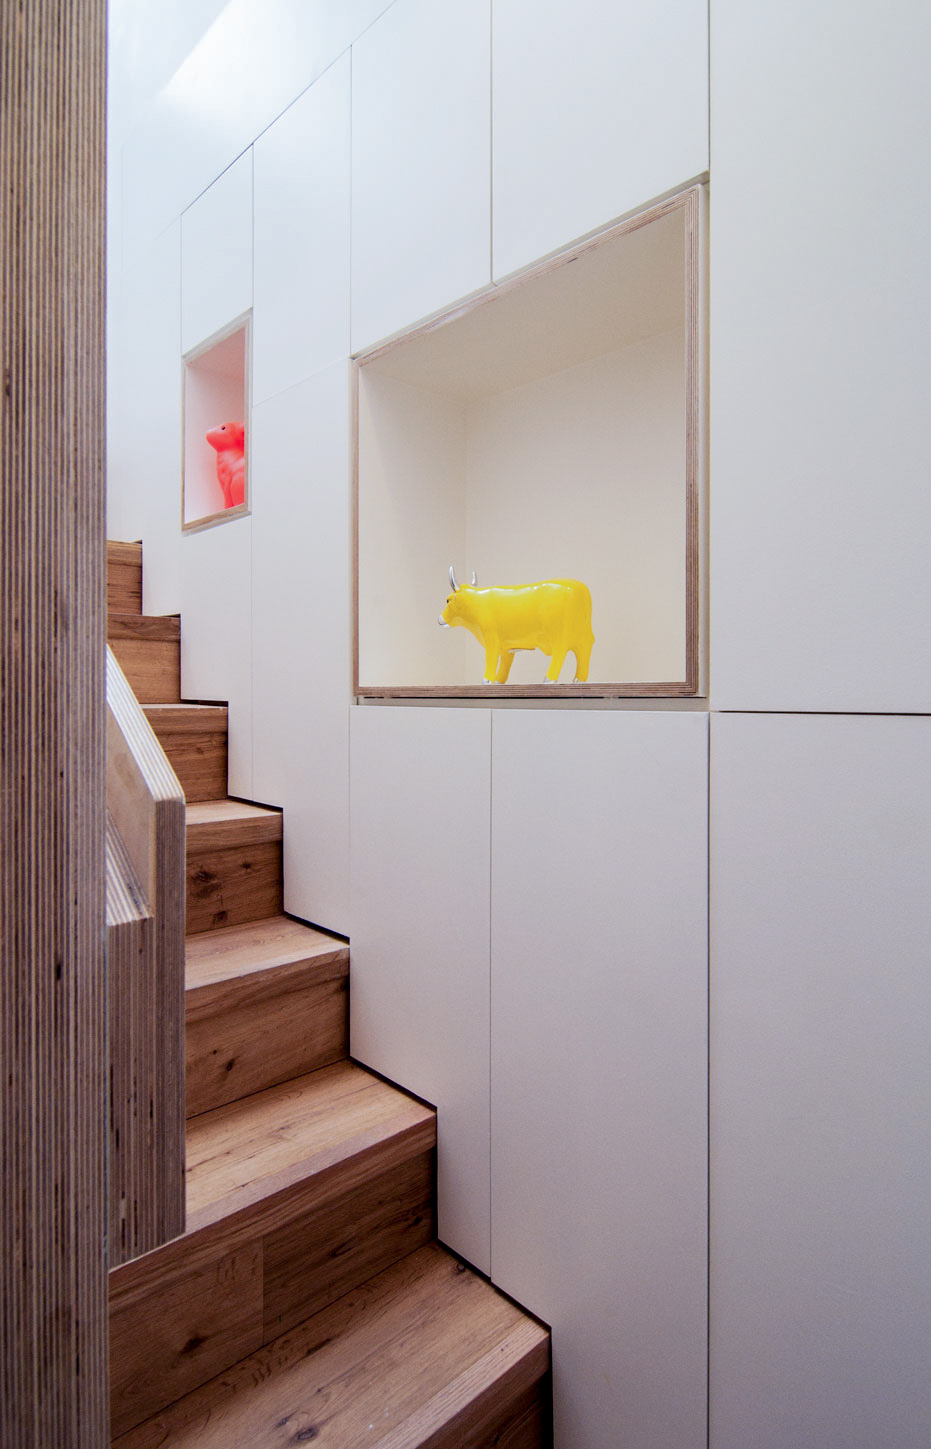 Bespoke staircase and contemporary storage and shelving providing plenty of storage space.